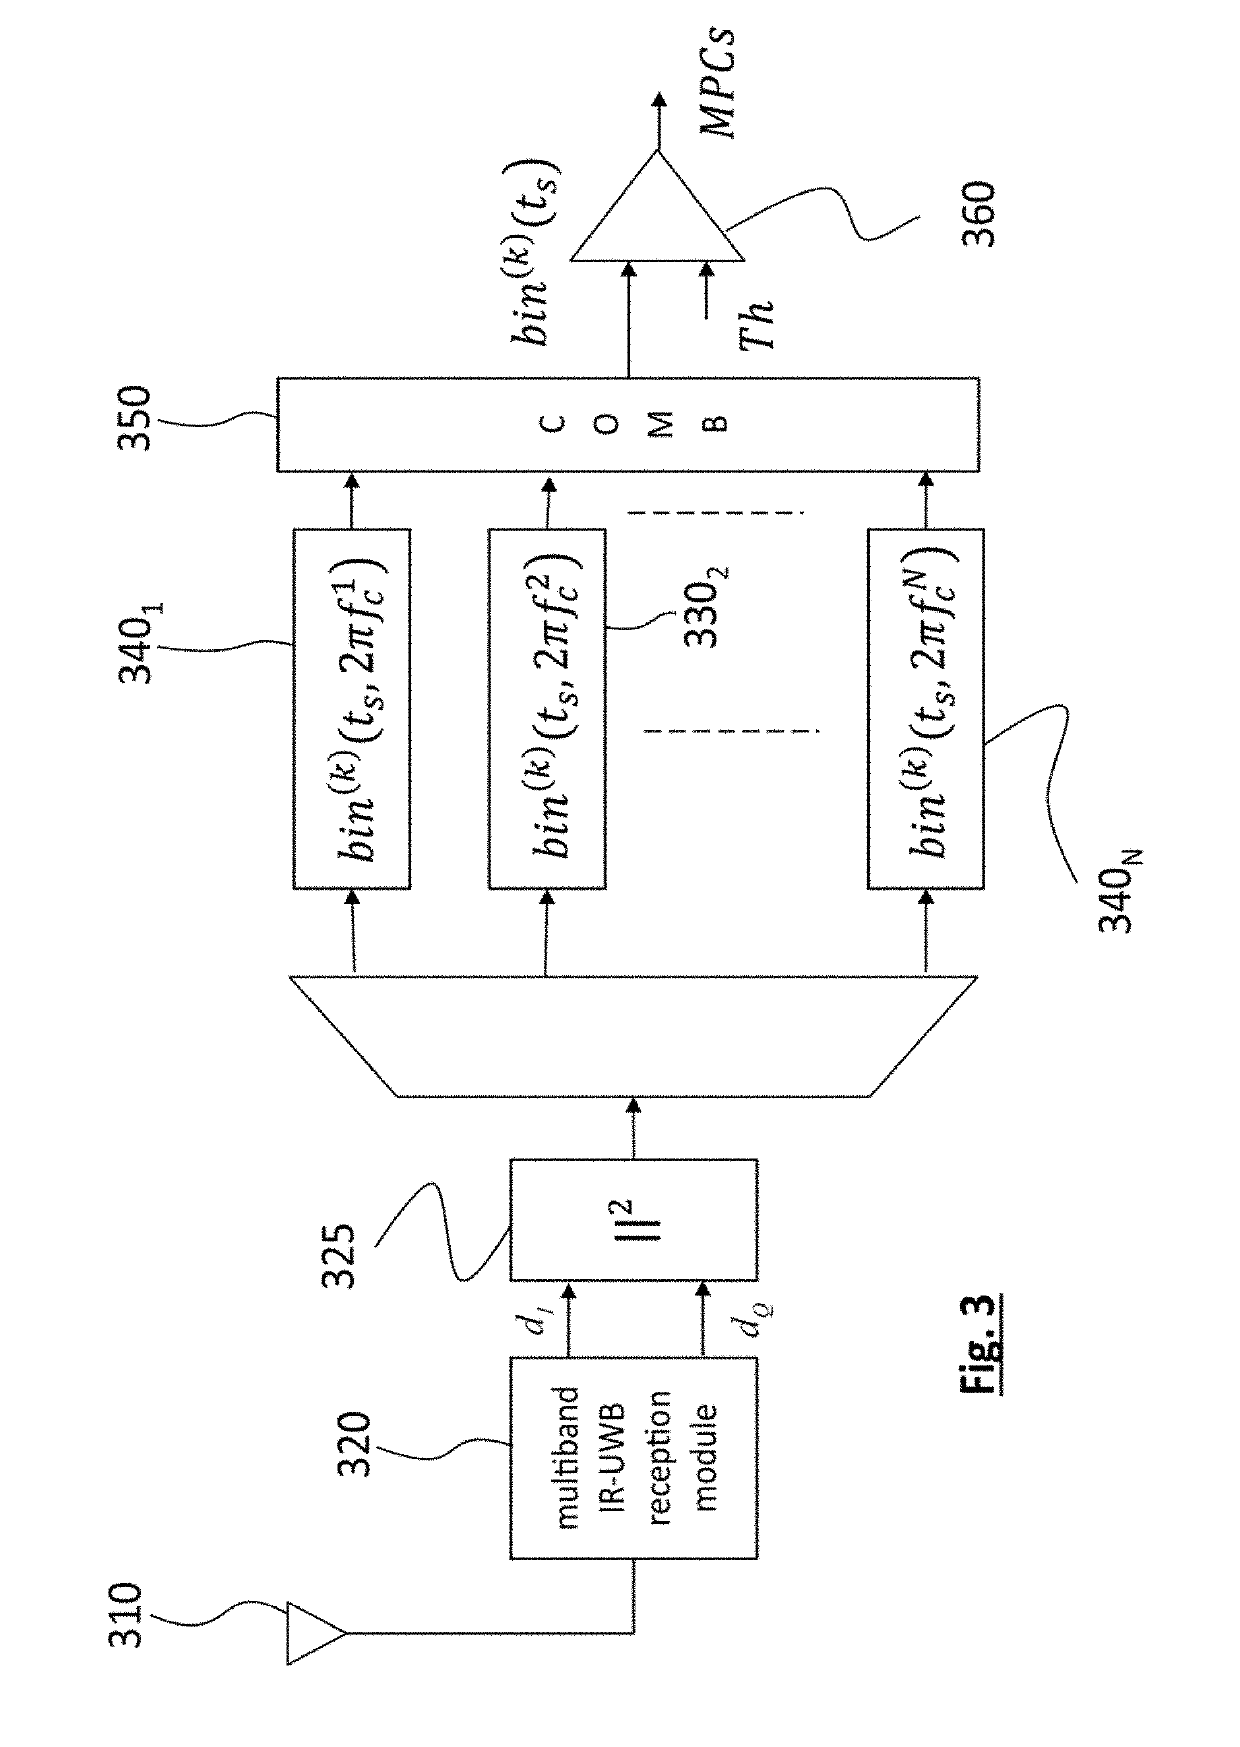 Method for determining multipath components of a UWB impulse channel